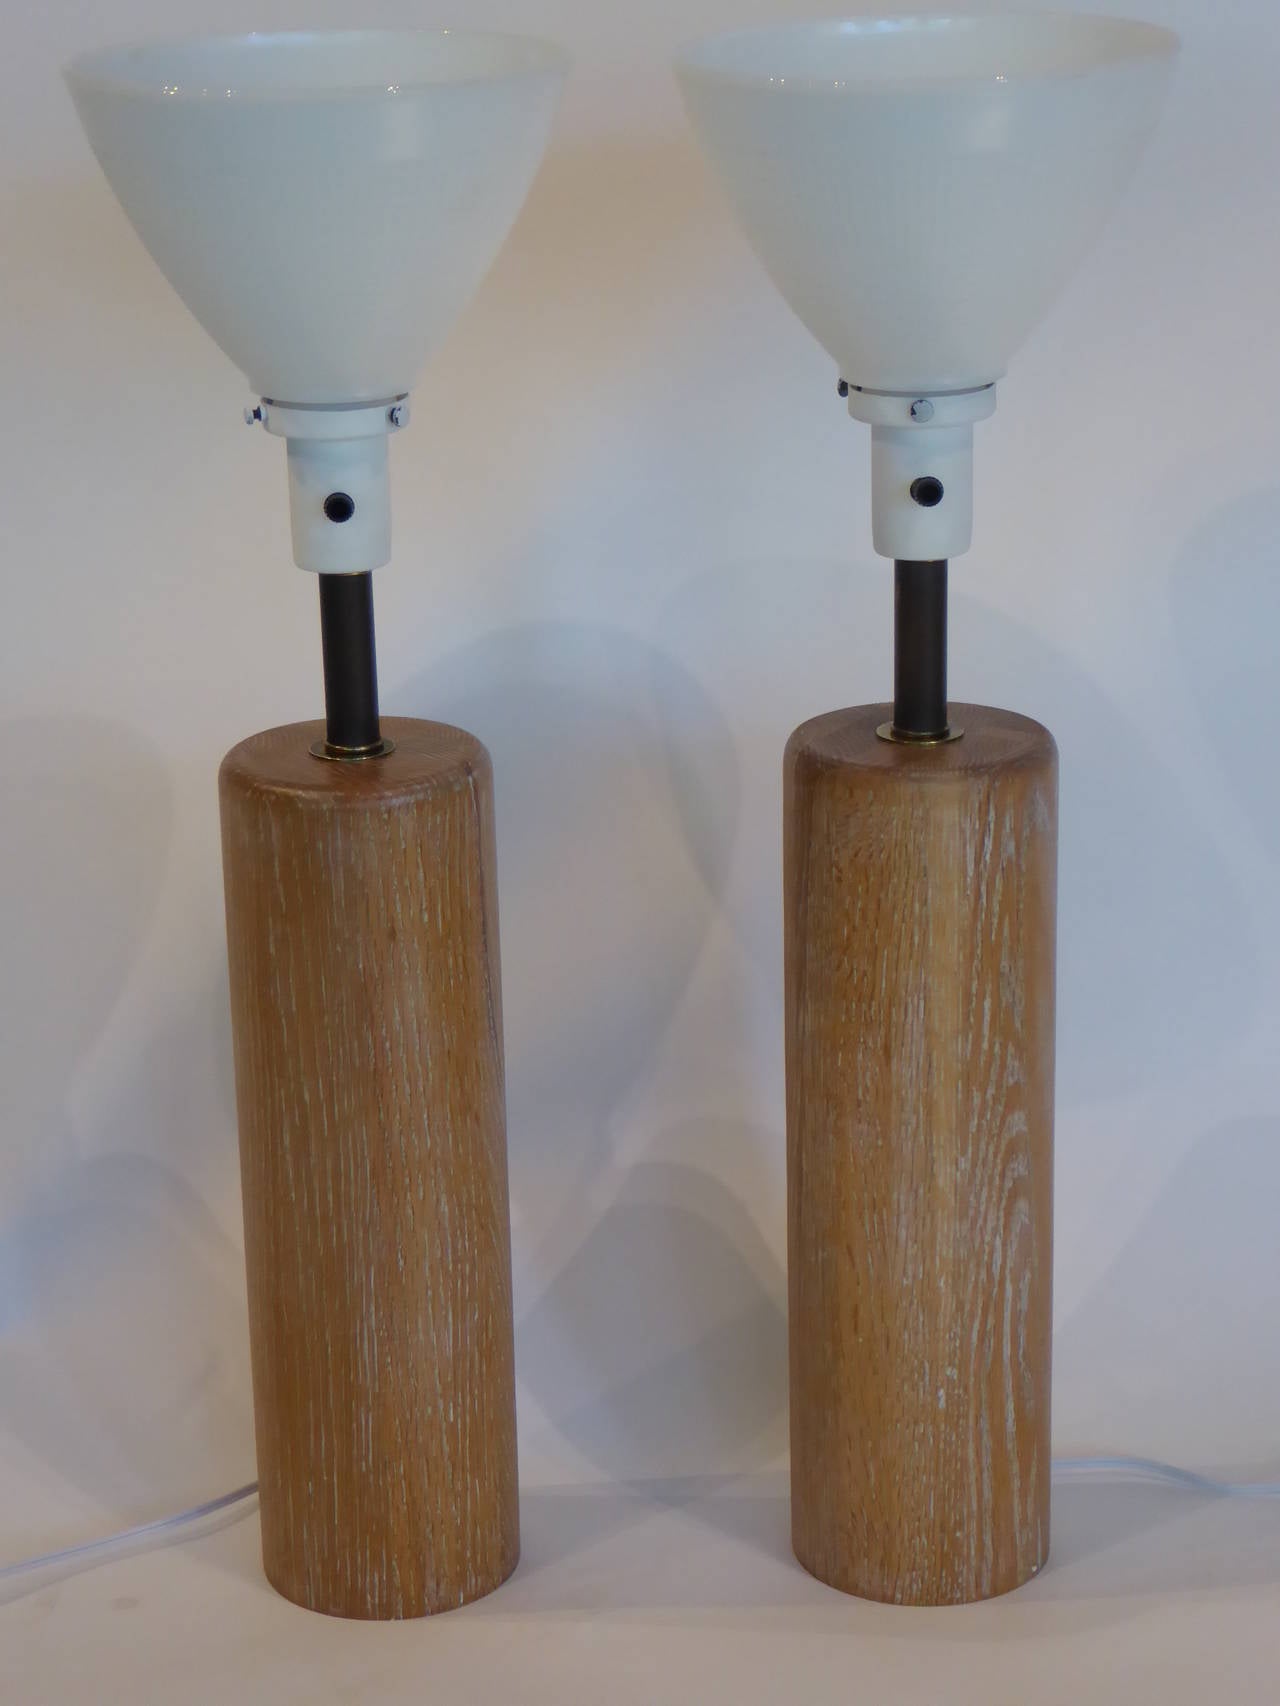 Beautiful figured cerused or limed oak highlights this pair of Nessen Studios table lamps. Classic and timeless, they are comfortable in all modern era styles. Rich wood columns rise to a bronze patina brass neck to the milk glass torchiere shade